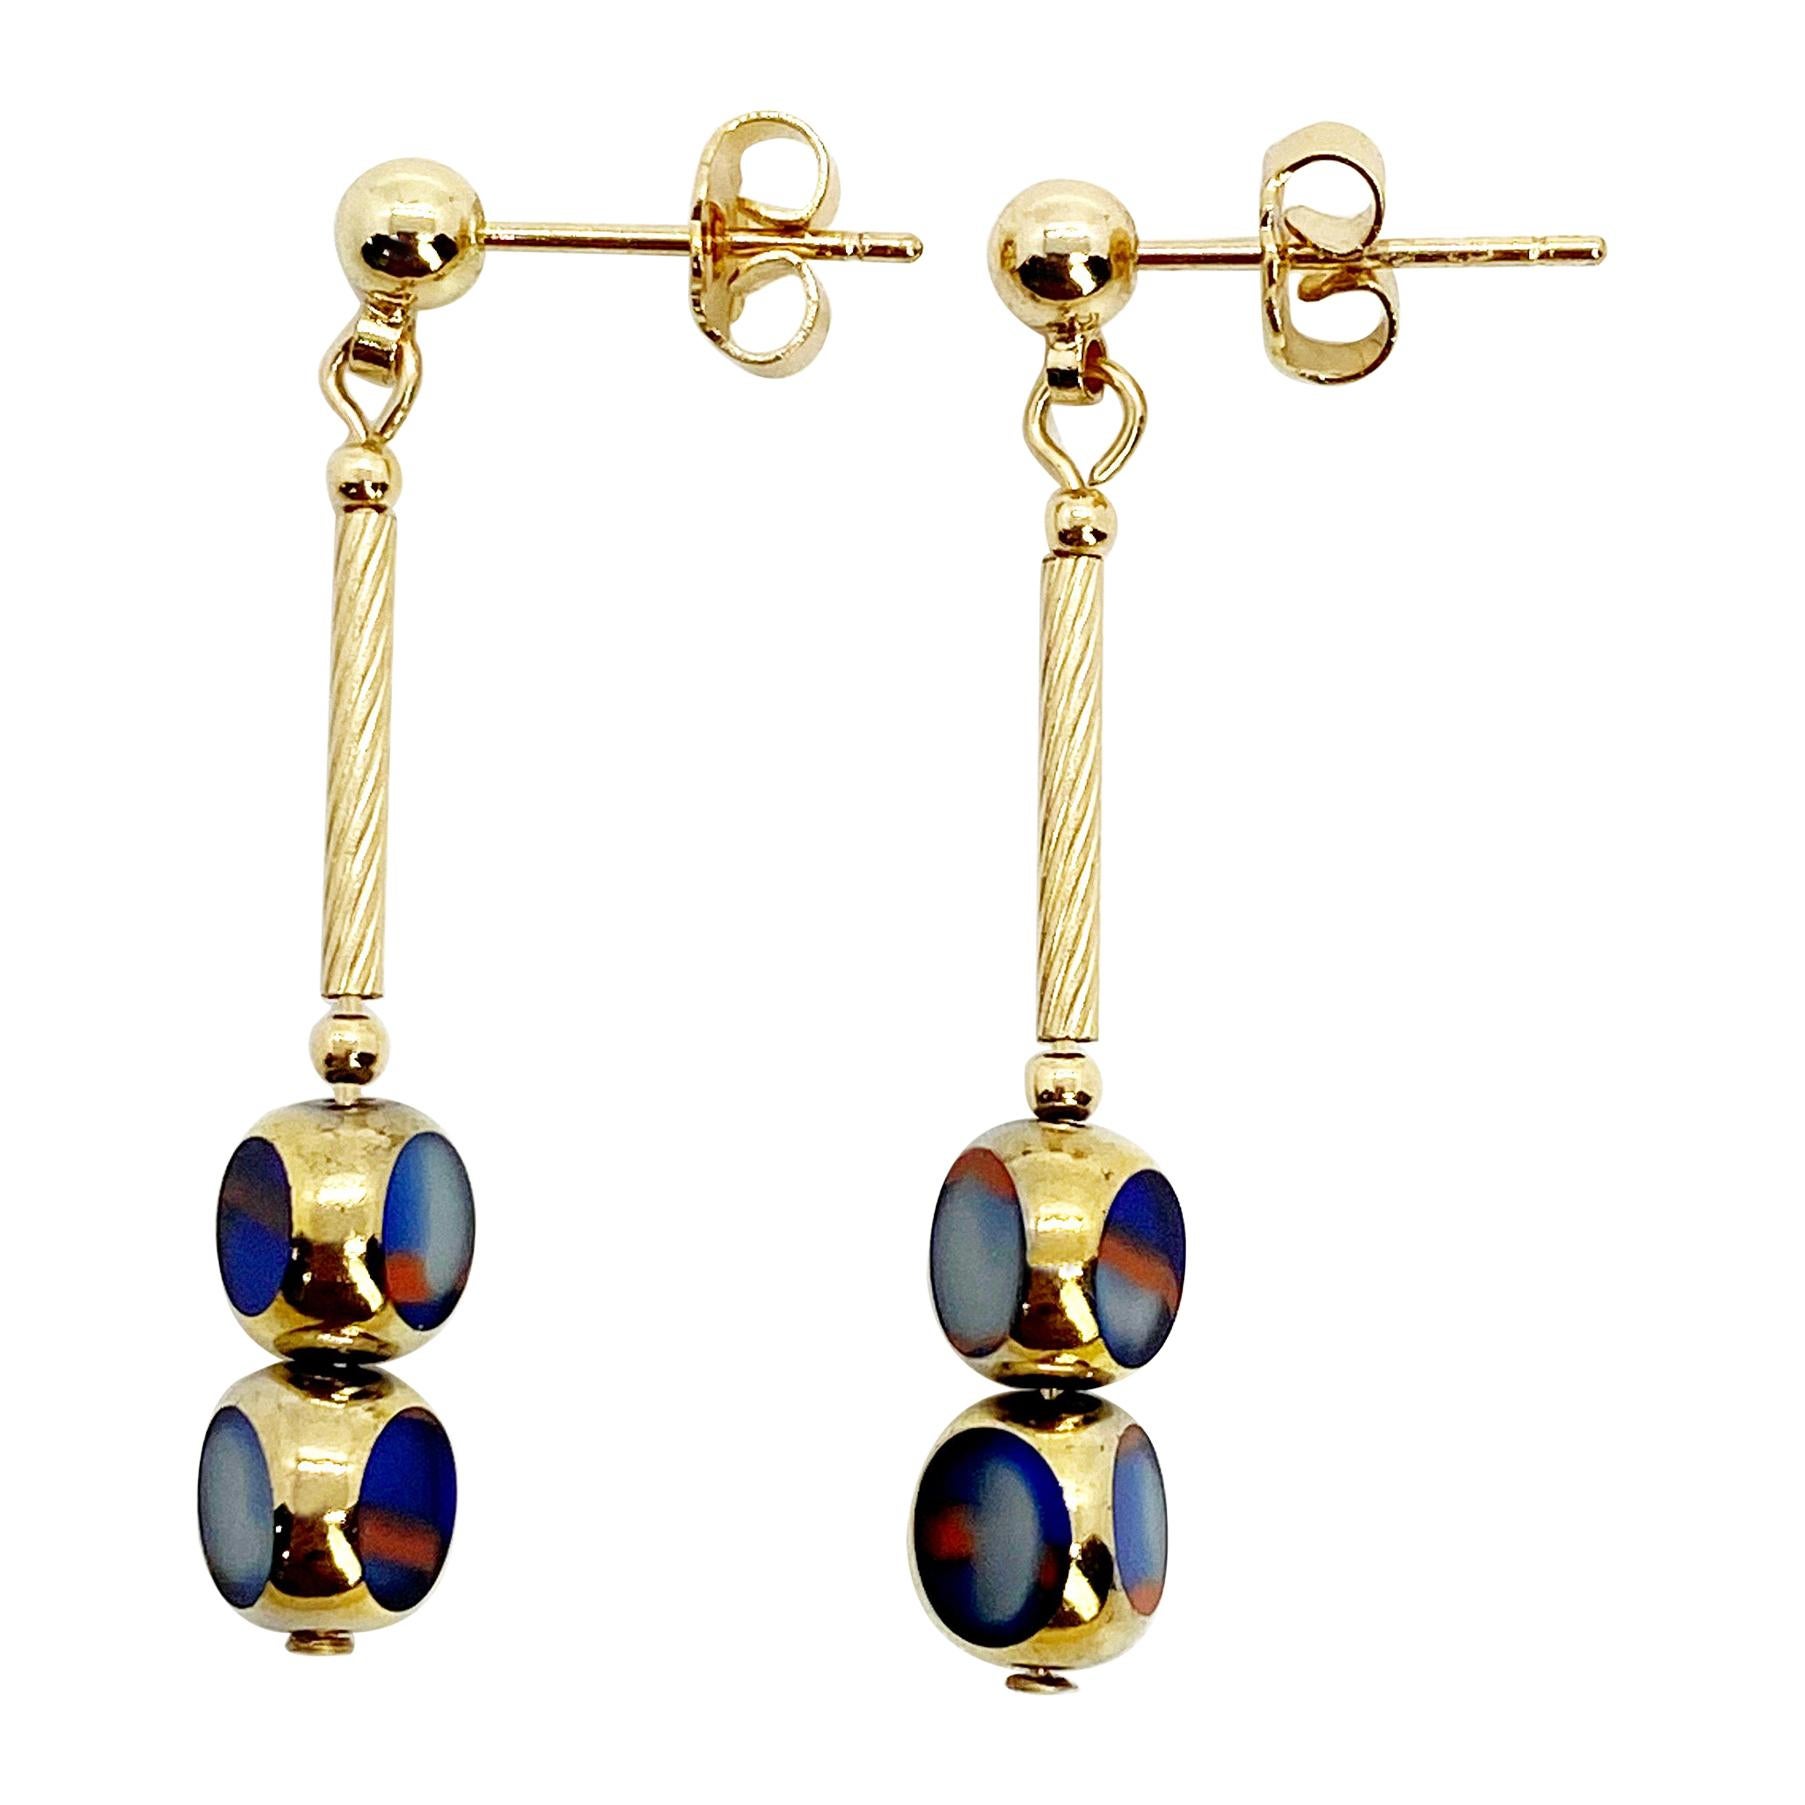 Mini Blue Marbled Vintage German Glass Beads edged with 24K gold Earrings For Sale